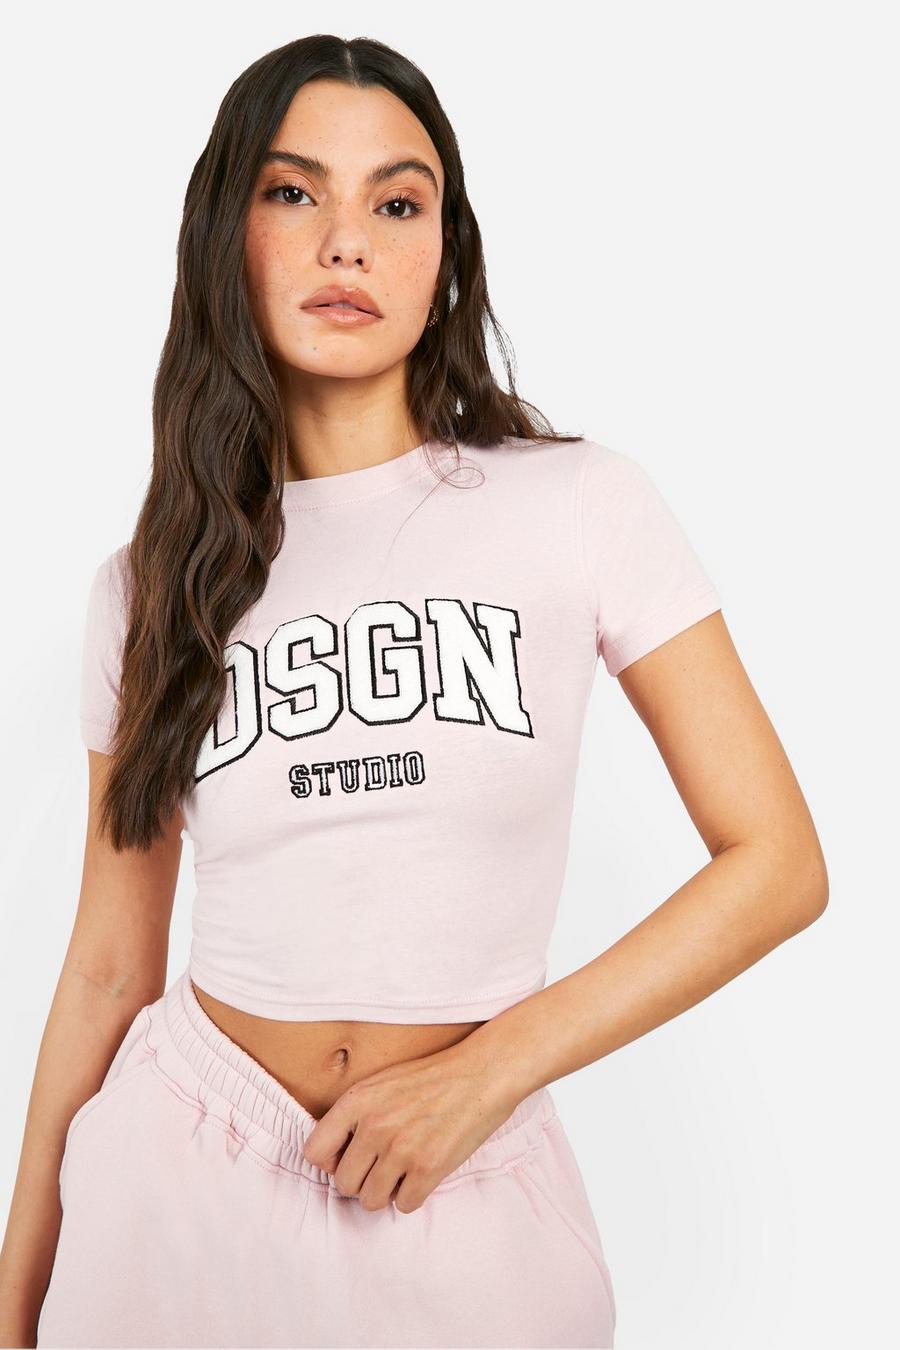 T-Shirt mit Dsgn Studio Frottee-Applikation, Baby pink